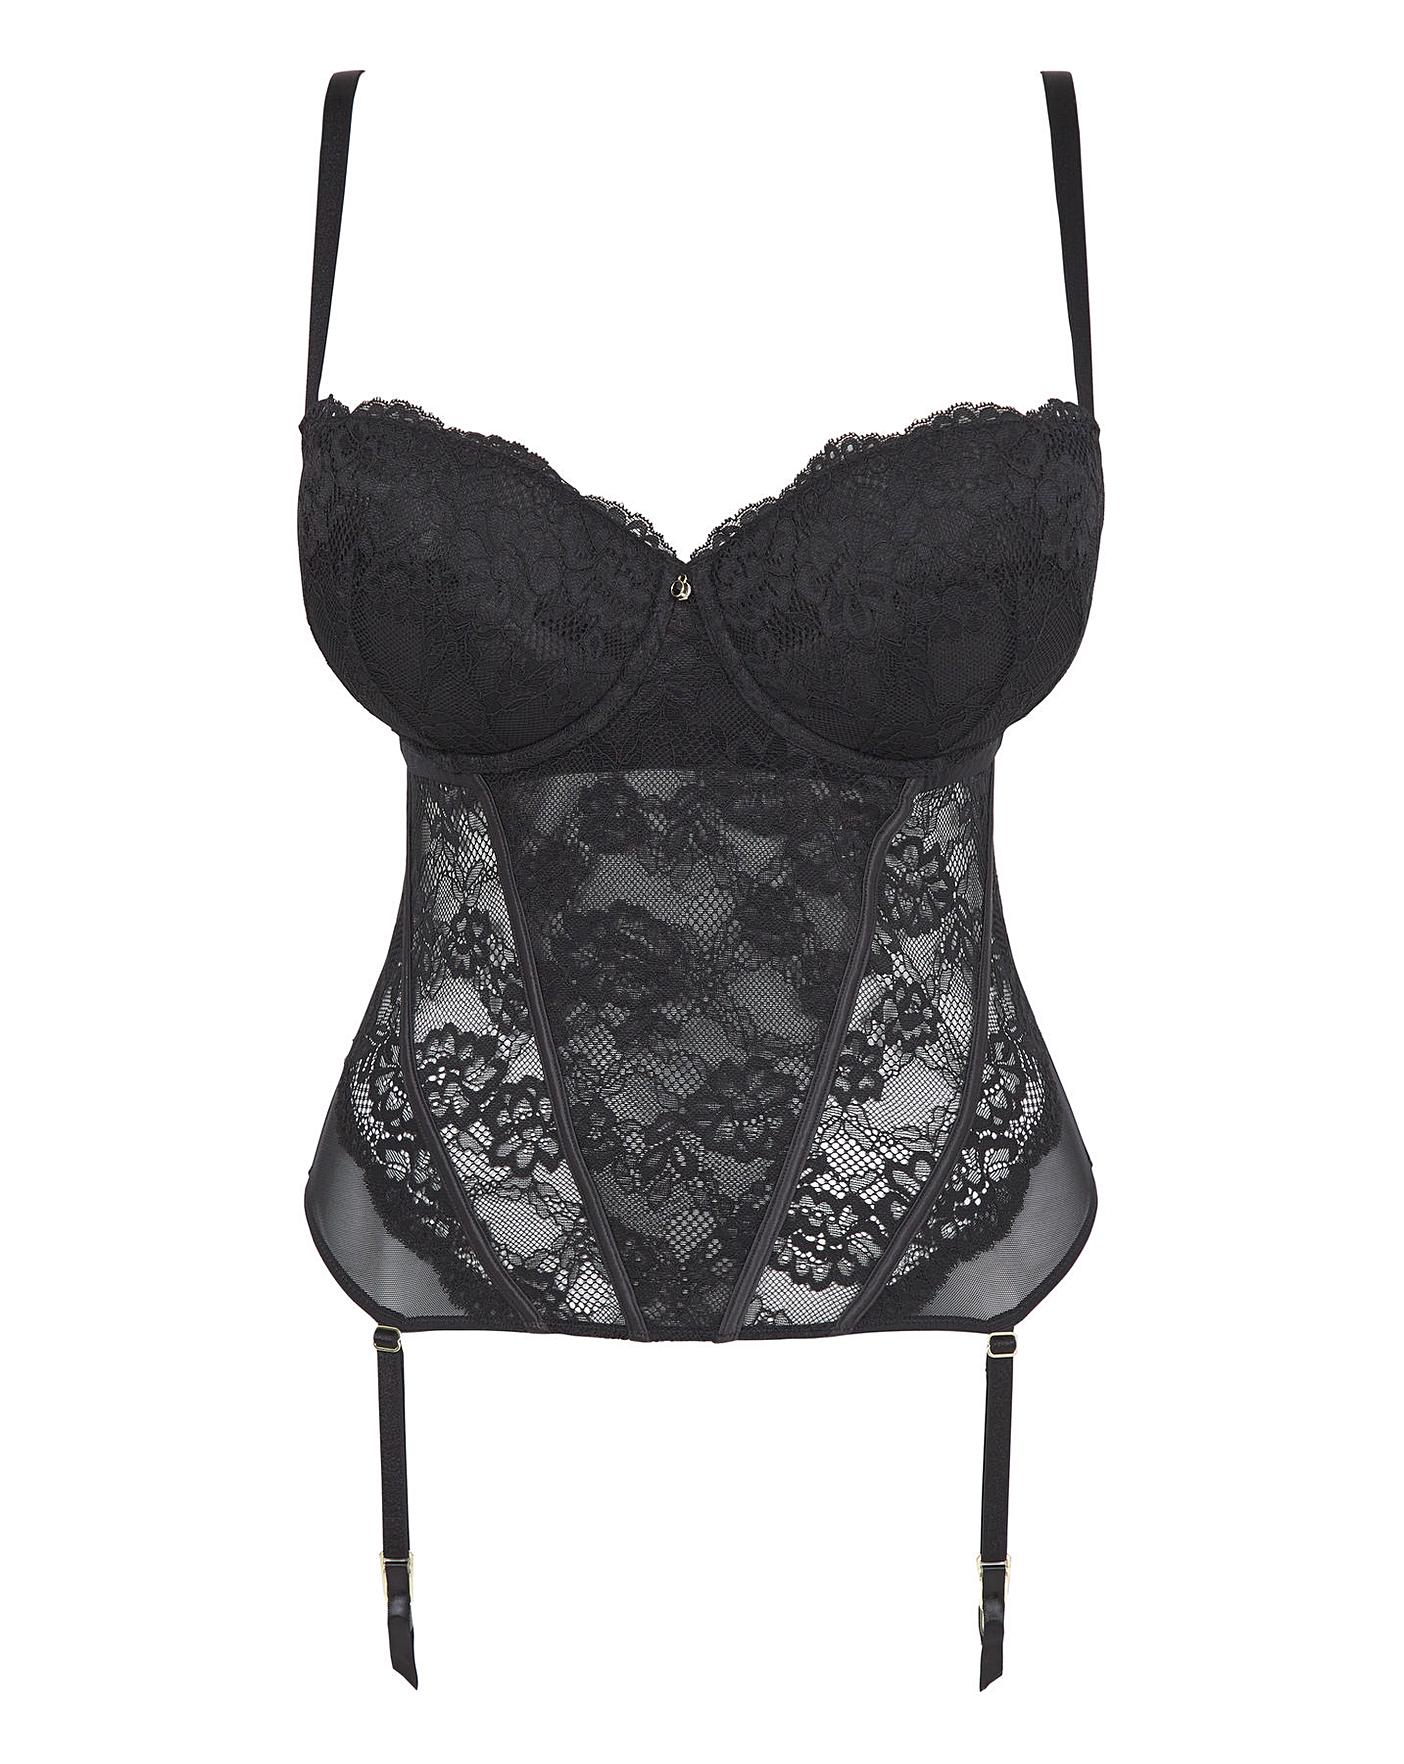 Ann Summers Sexy Lace Basque | Marisota